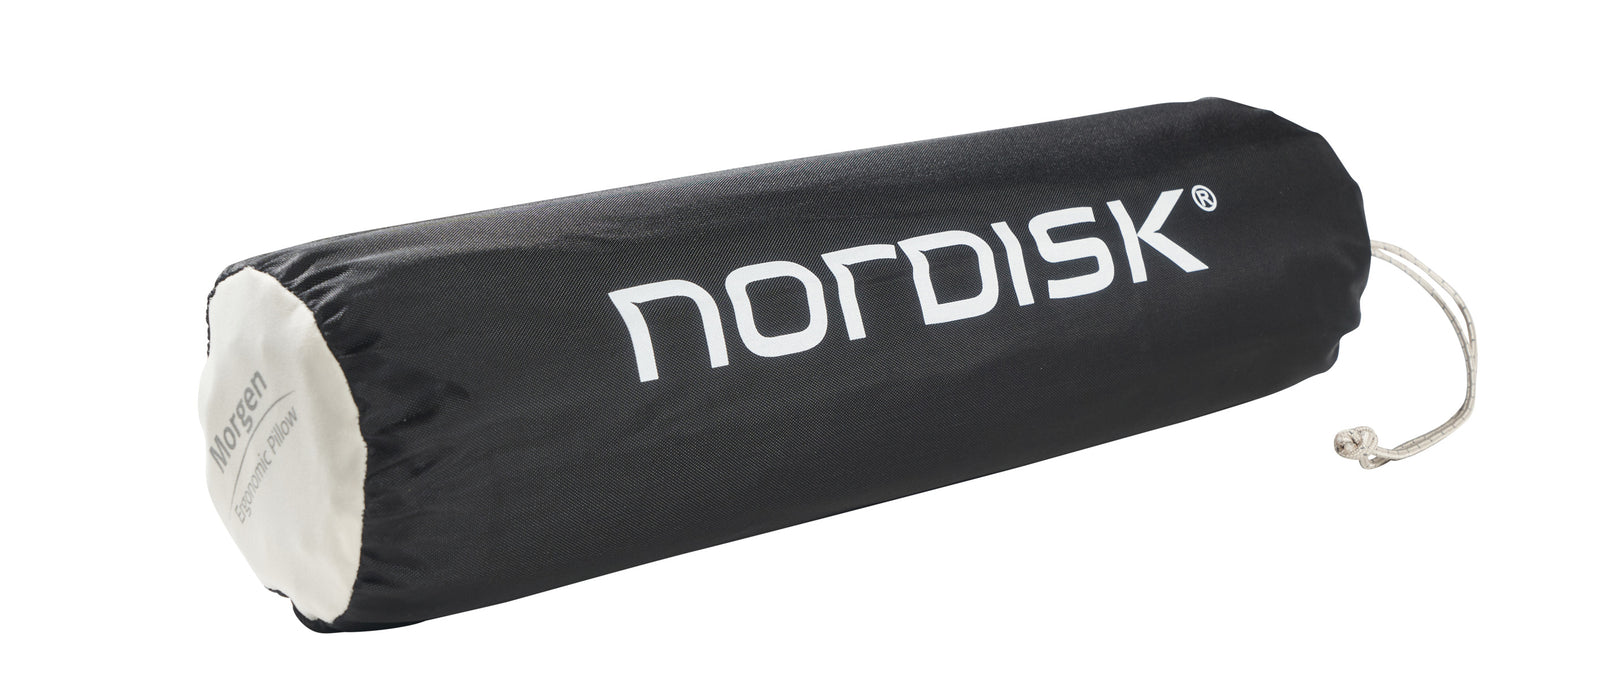 Nordisk Morgen Self-Inflate Pillow